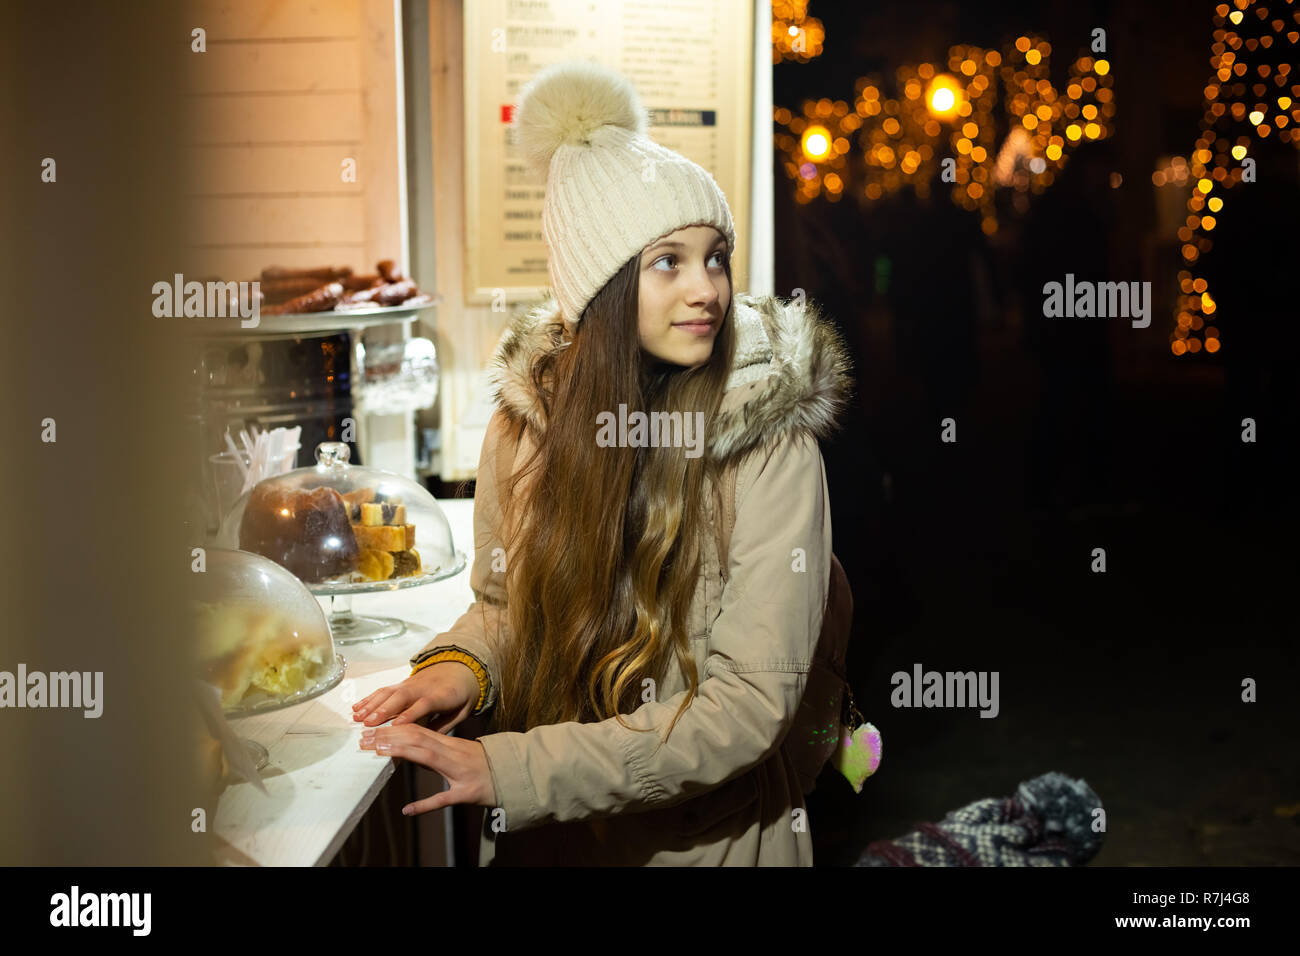 Beautiful teenager in front of traditional Christmas market food stand, Zagreb, Croacia. Stock Photo